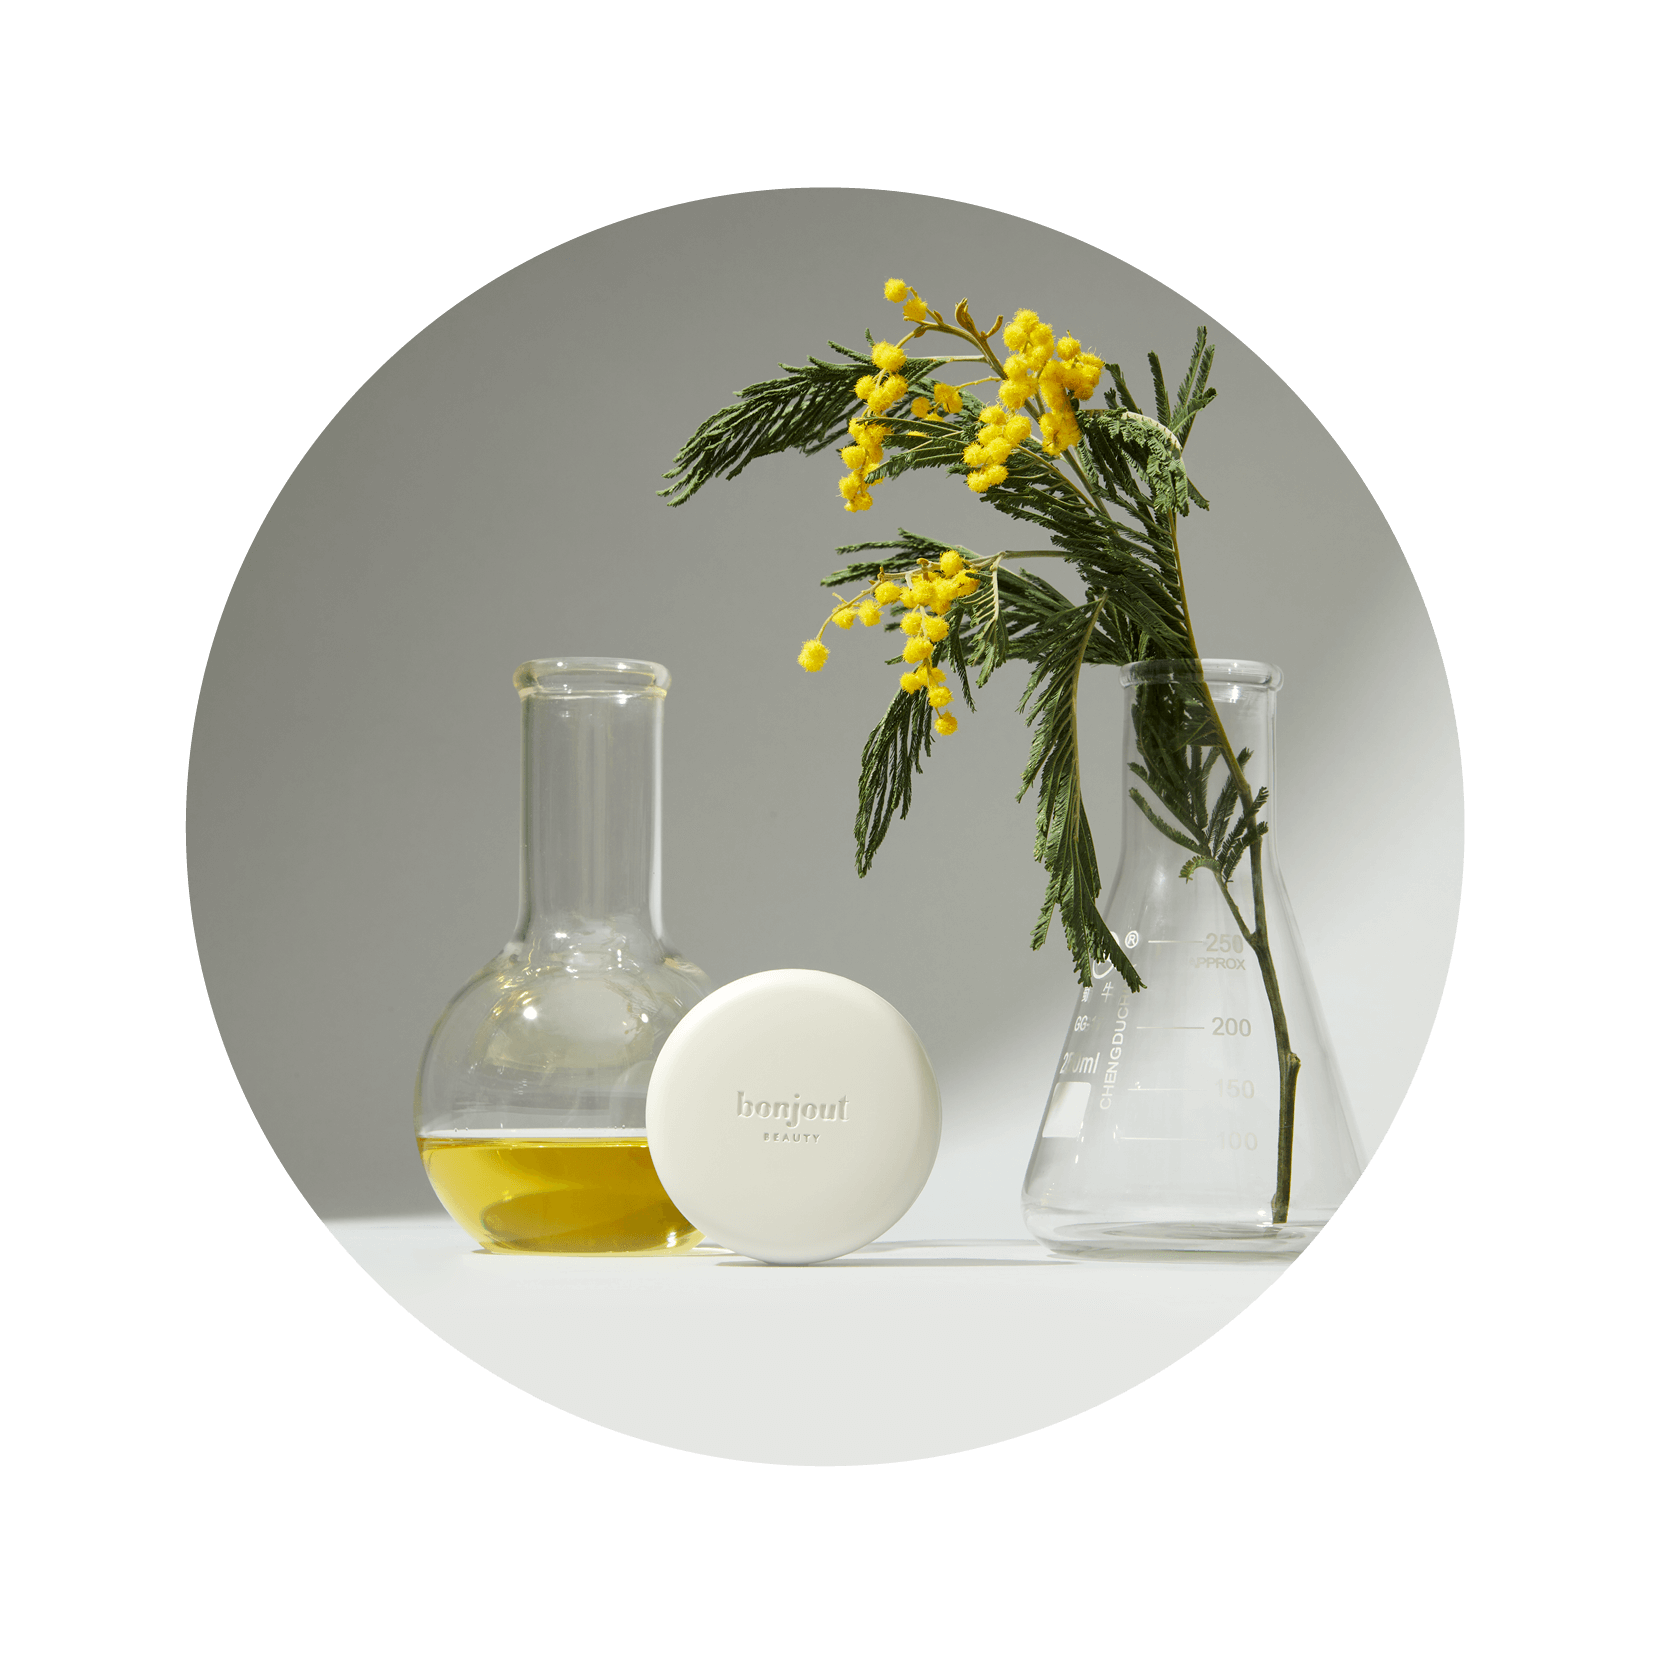 Bonjout Beauty With Le Balm Product & Beakers in the Laboratory